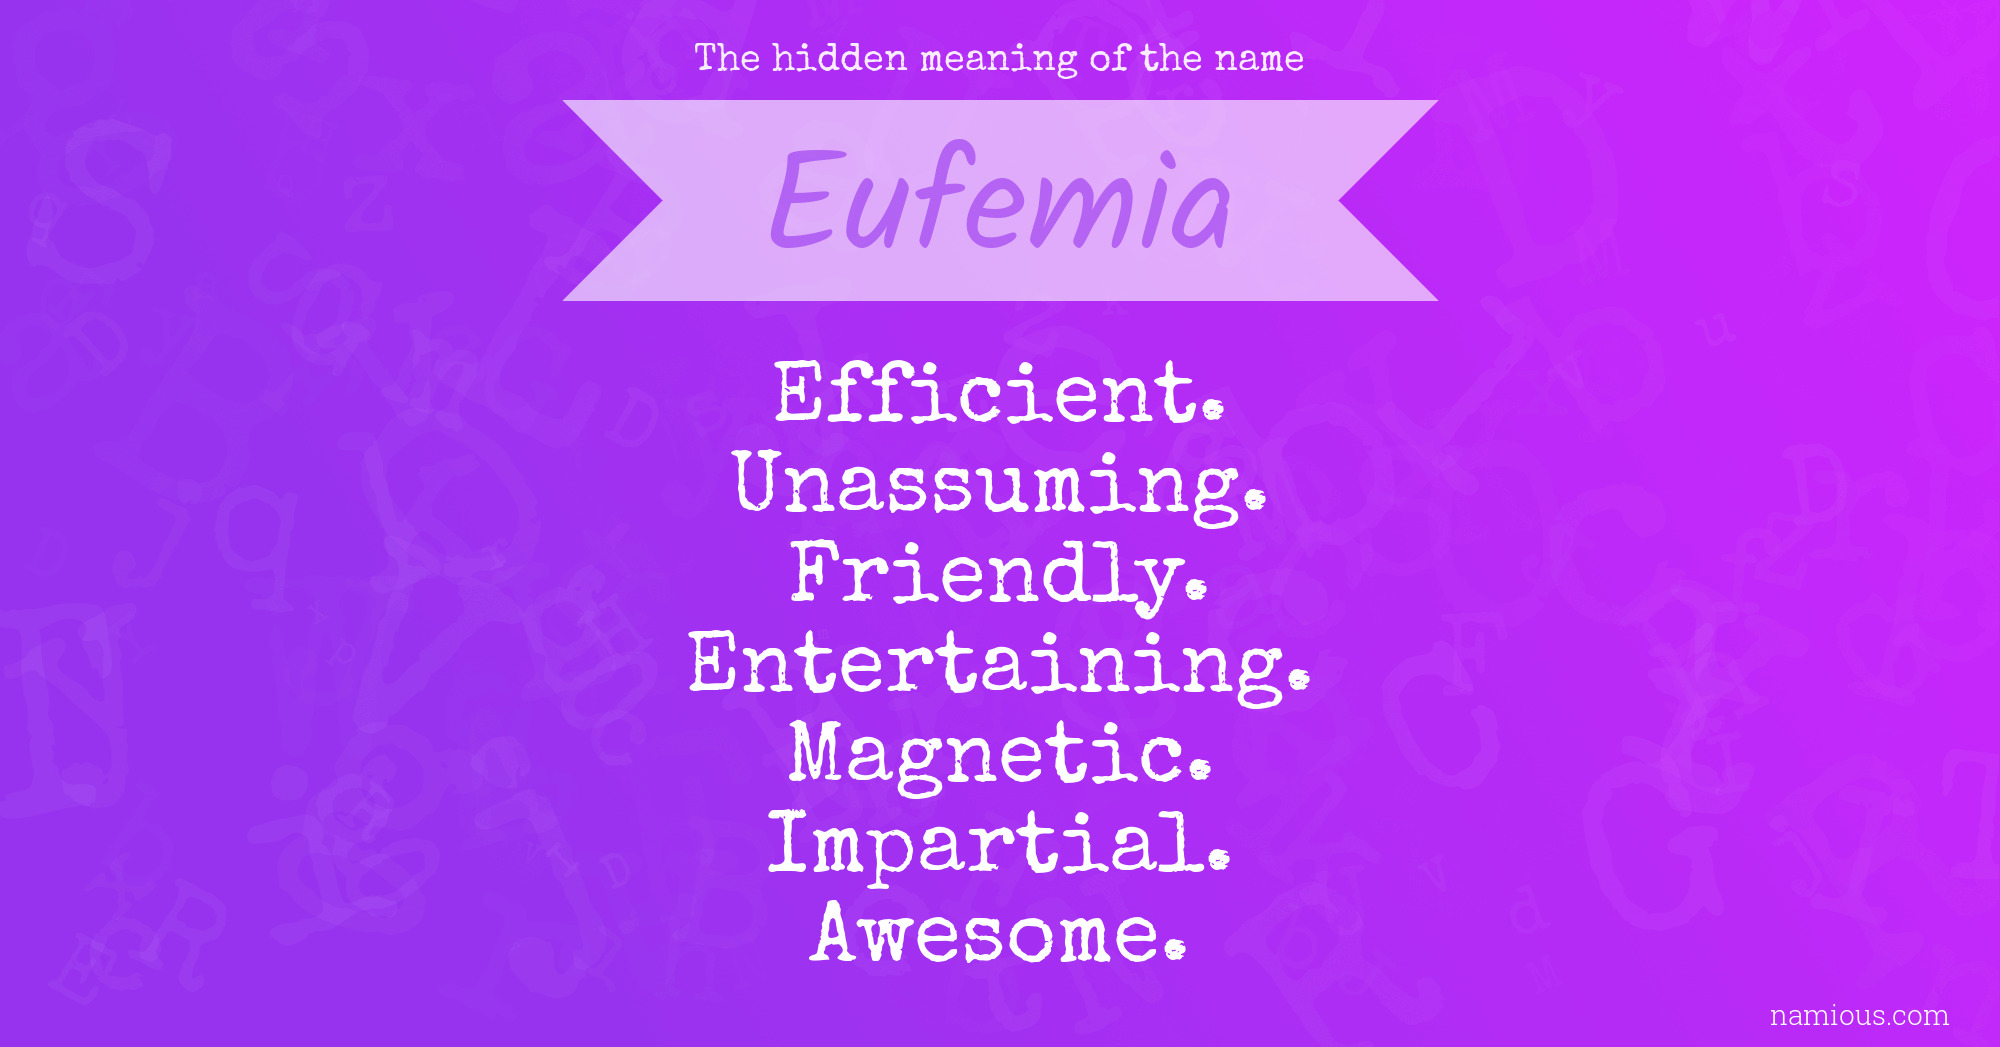 The hidden meaning of the name Eufemia